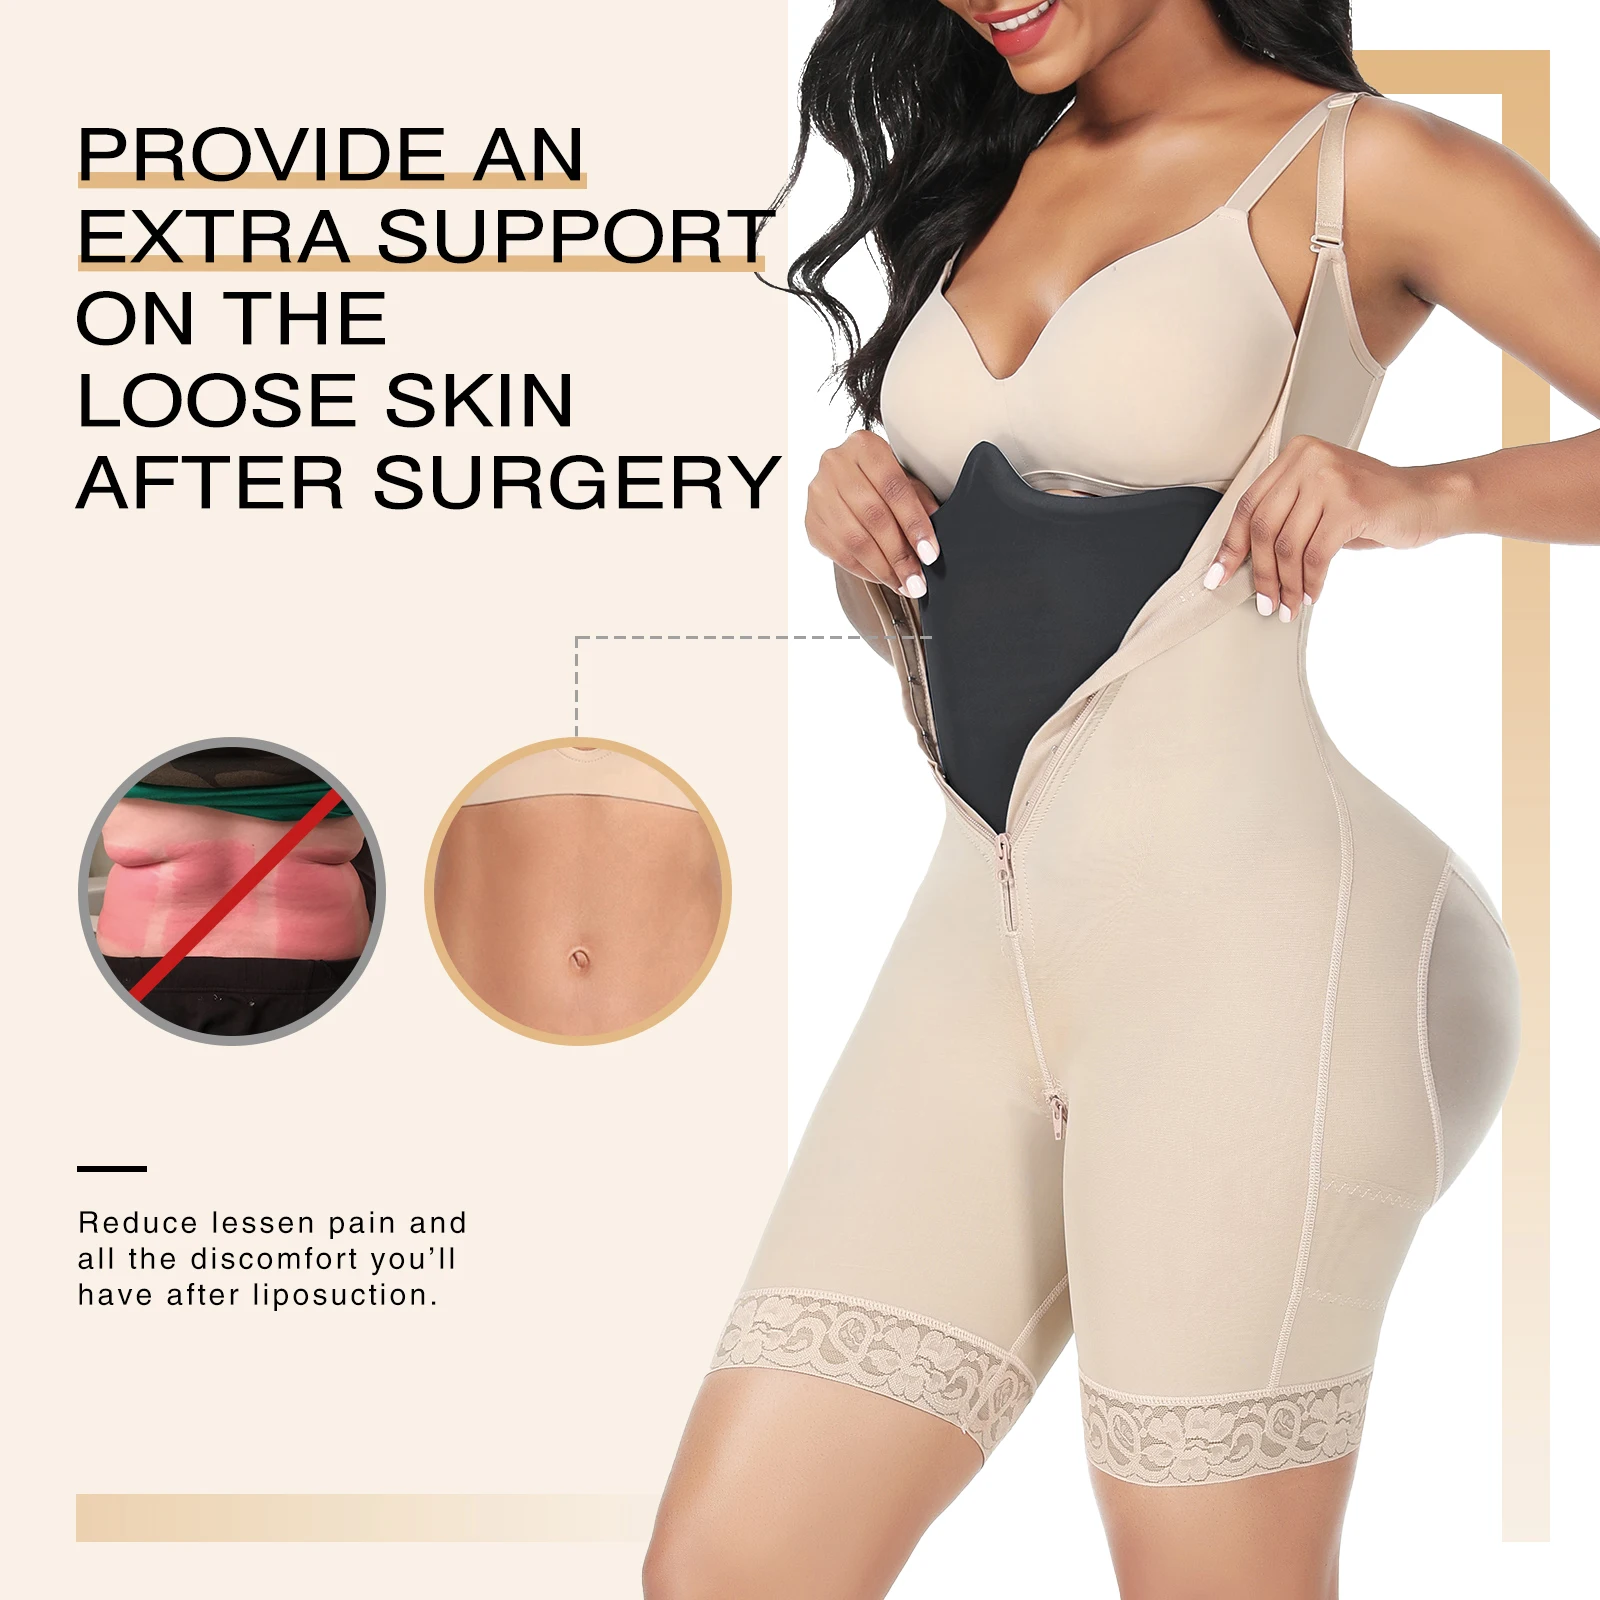 Lipo Foam Post Surgery Pads, Liposuction Recovery Foam Boards, Compatable  with Compression Garment Sheets, Faja, Abdominal Binder, Waist Trainer